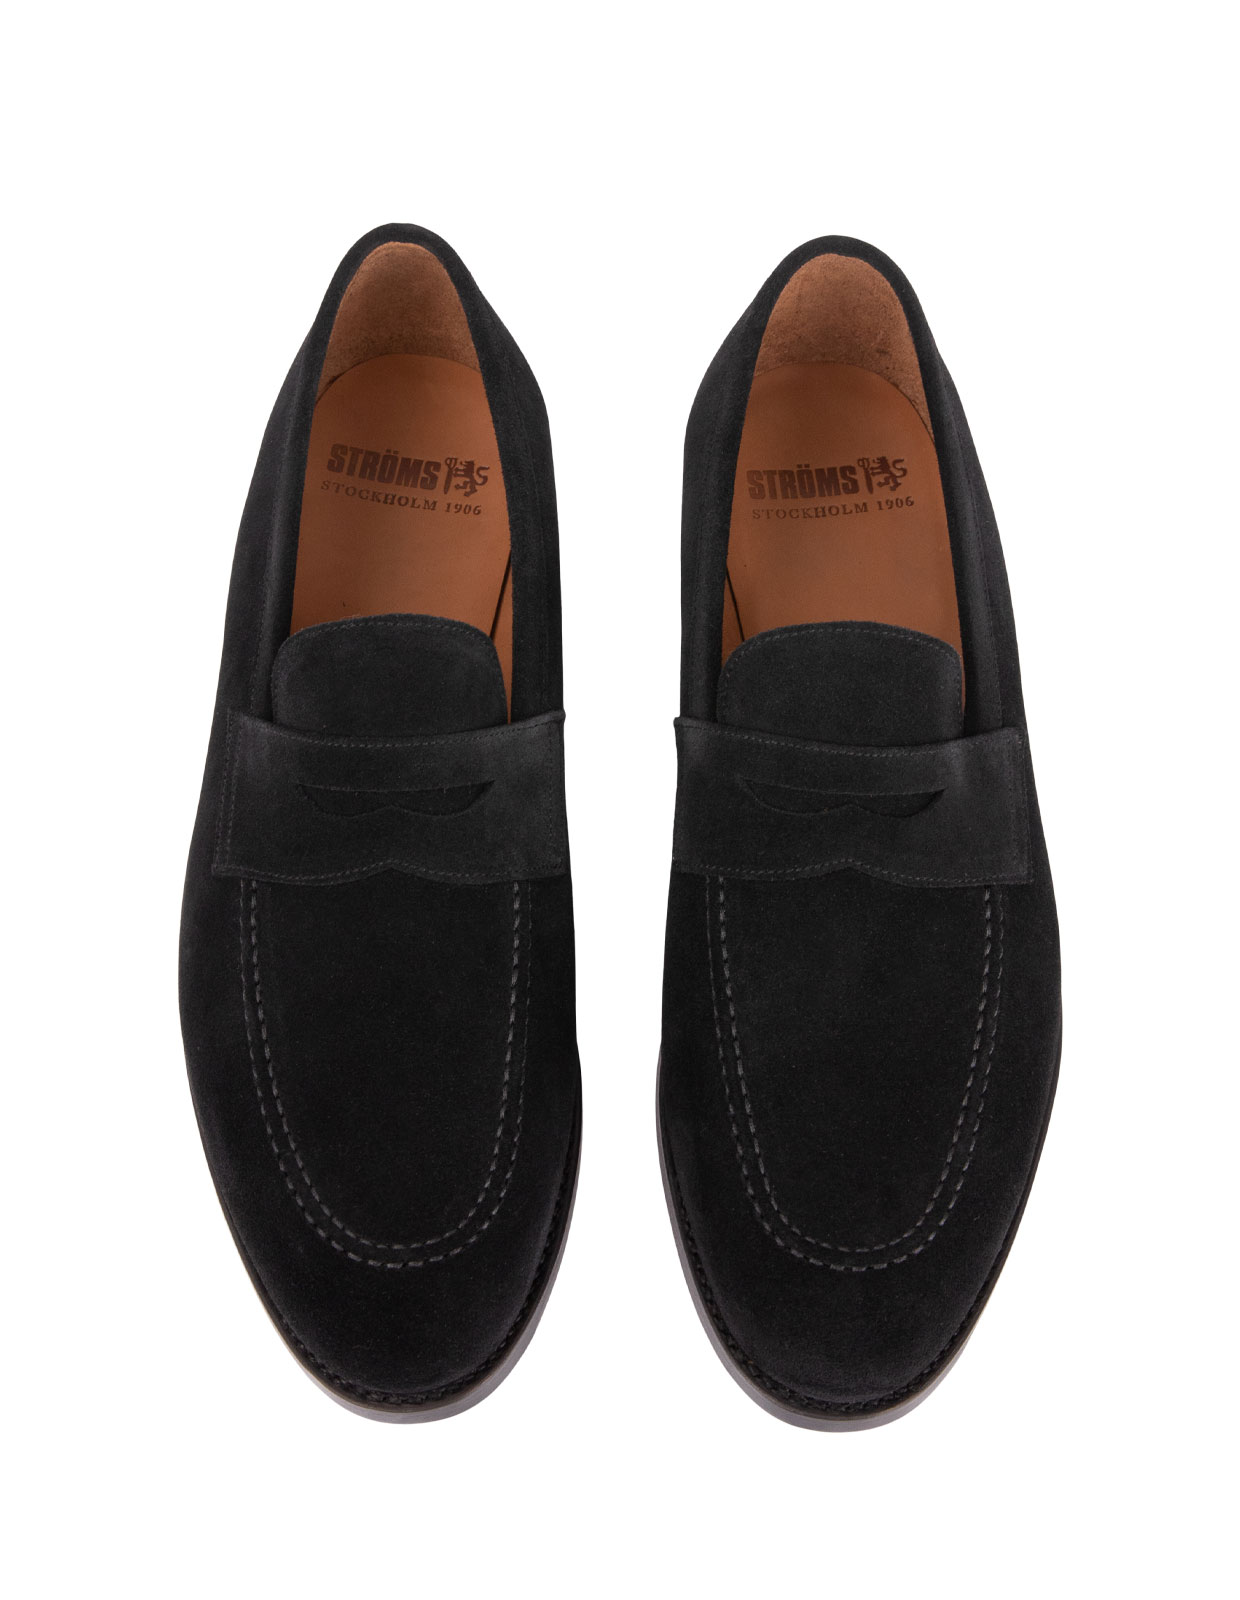 Penny Loafers Suede Black Stl 6